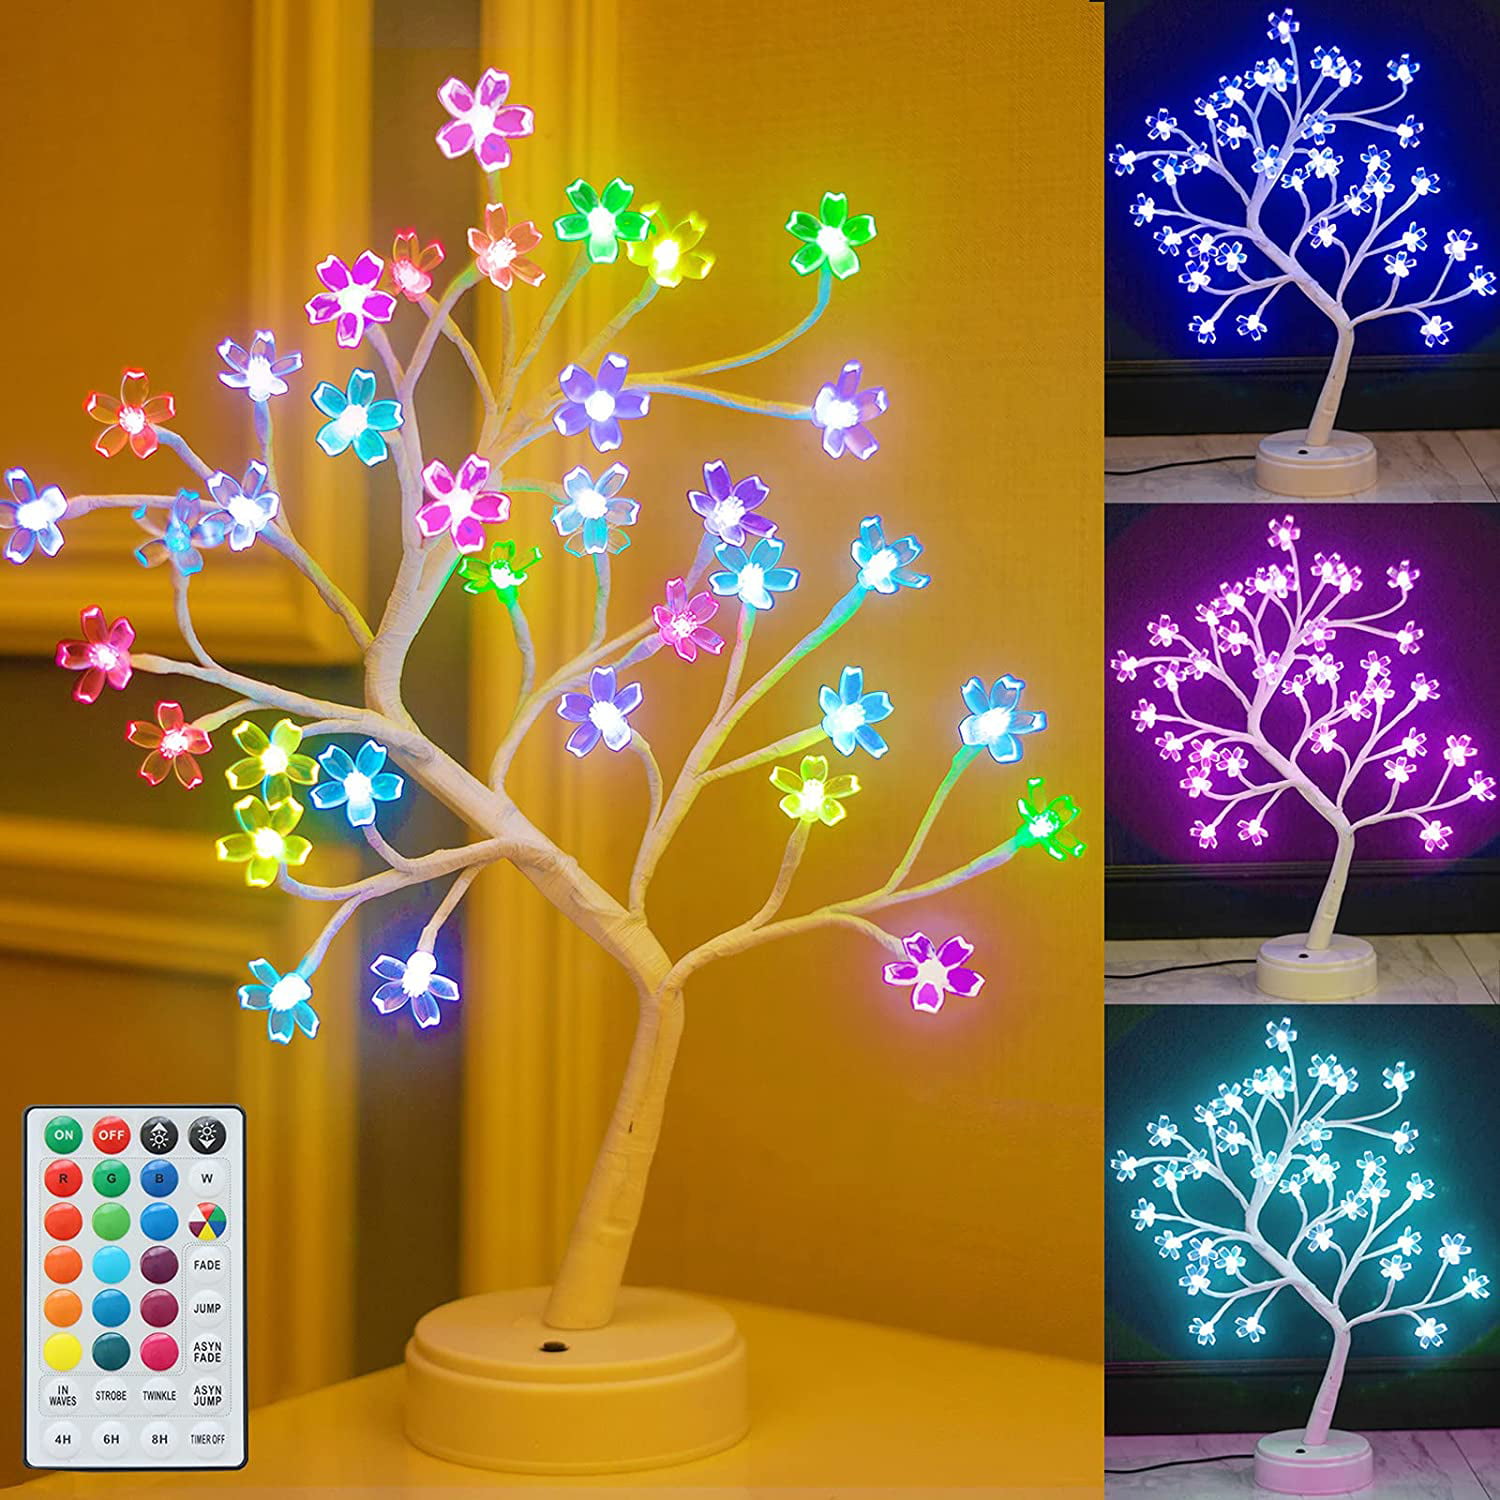 Pooqla RGB Cherry Blossom Tree Light with Remote Control 16 Color-Changing LED Artificial Flower Bonsai Tree Table Top Lamp Modern Home Lit Tree Centerpieces Decoration 36 LED